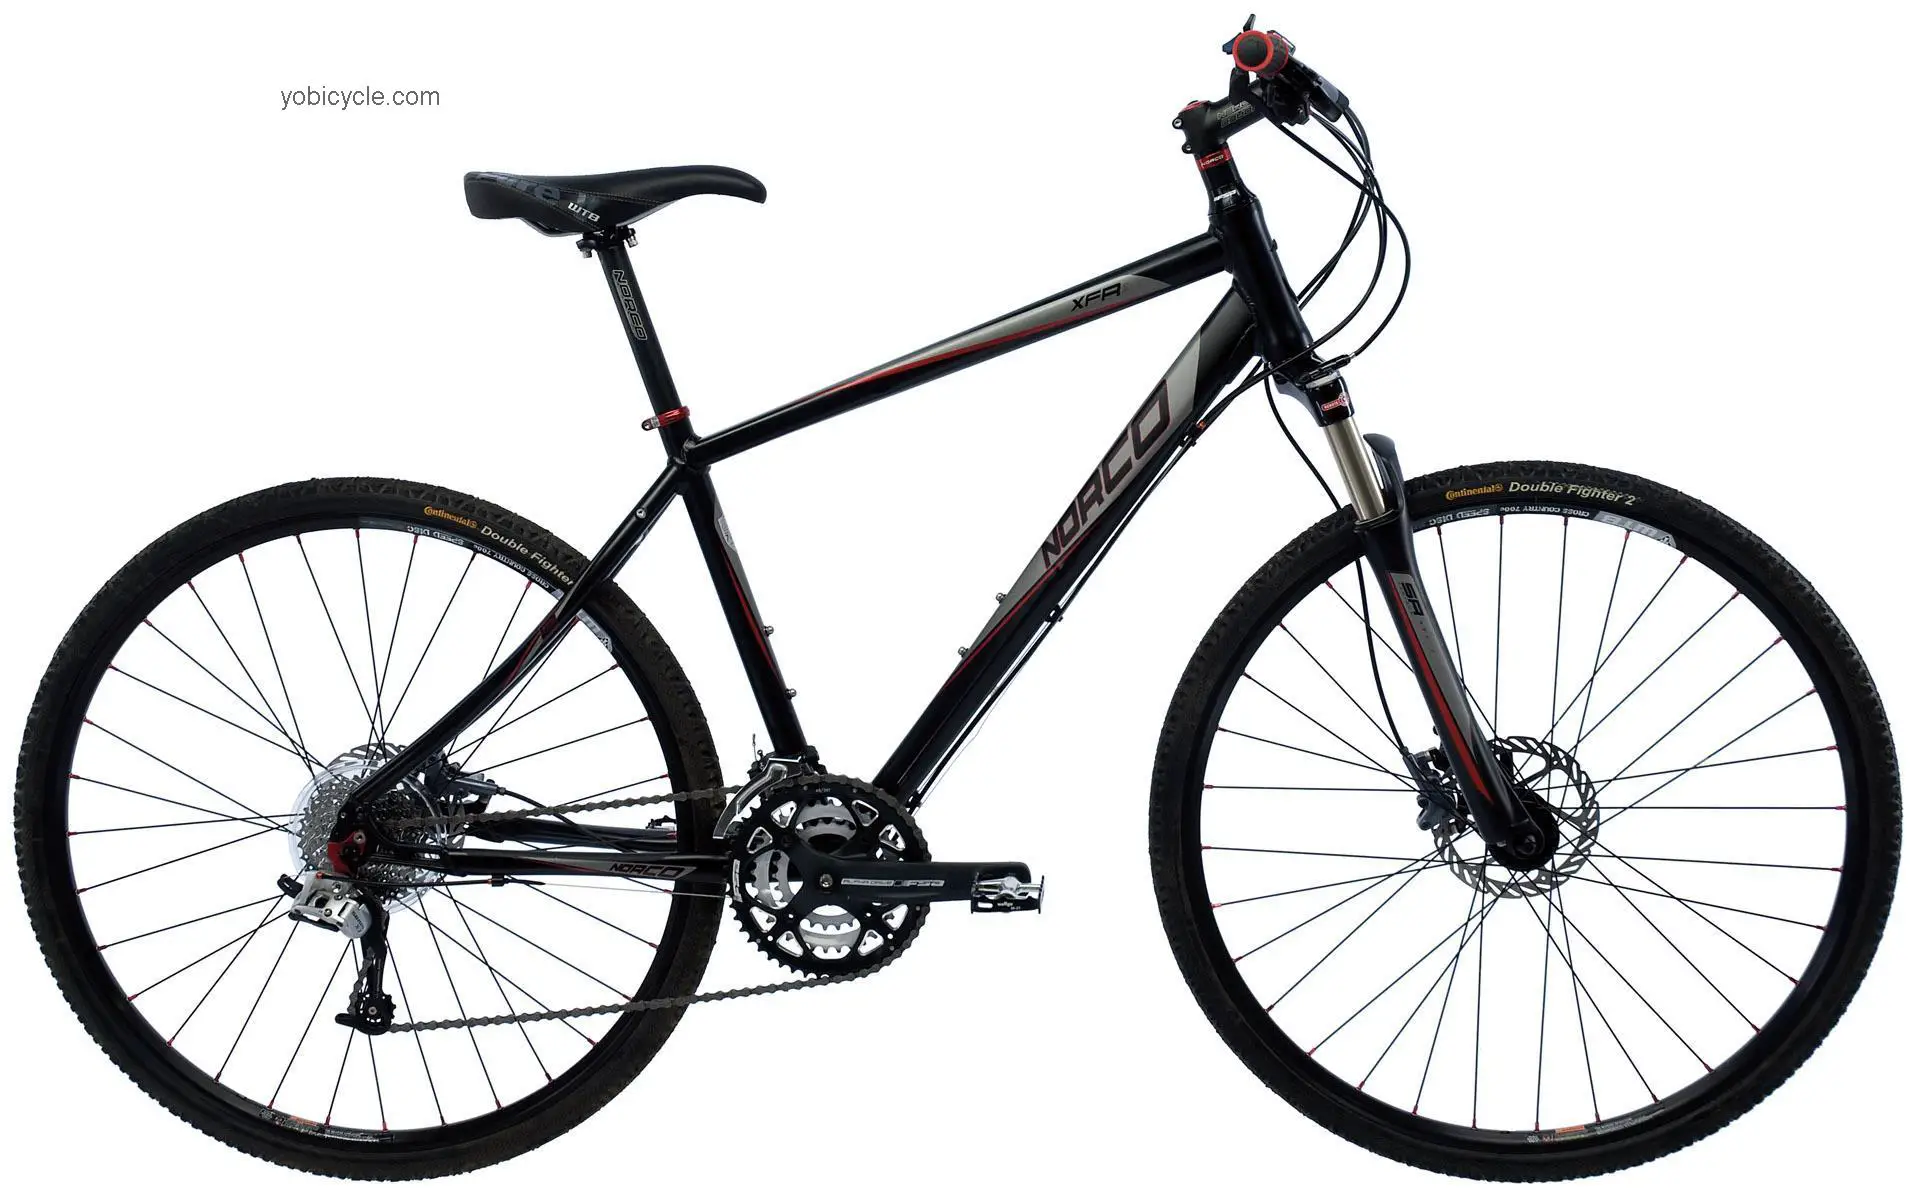 Norco XFR 1 2011 comparison online with competitors